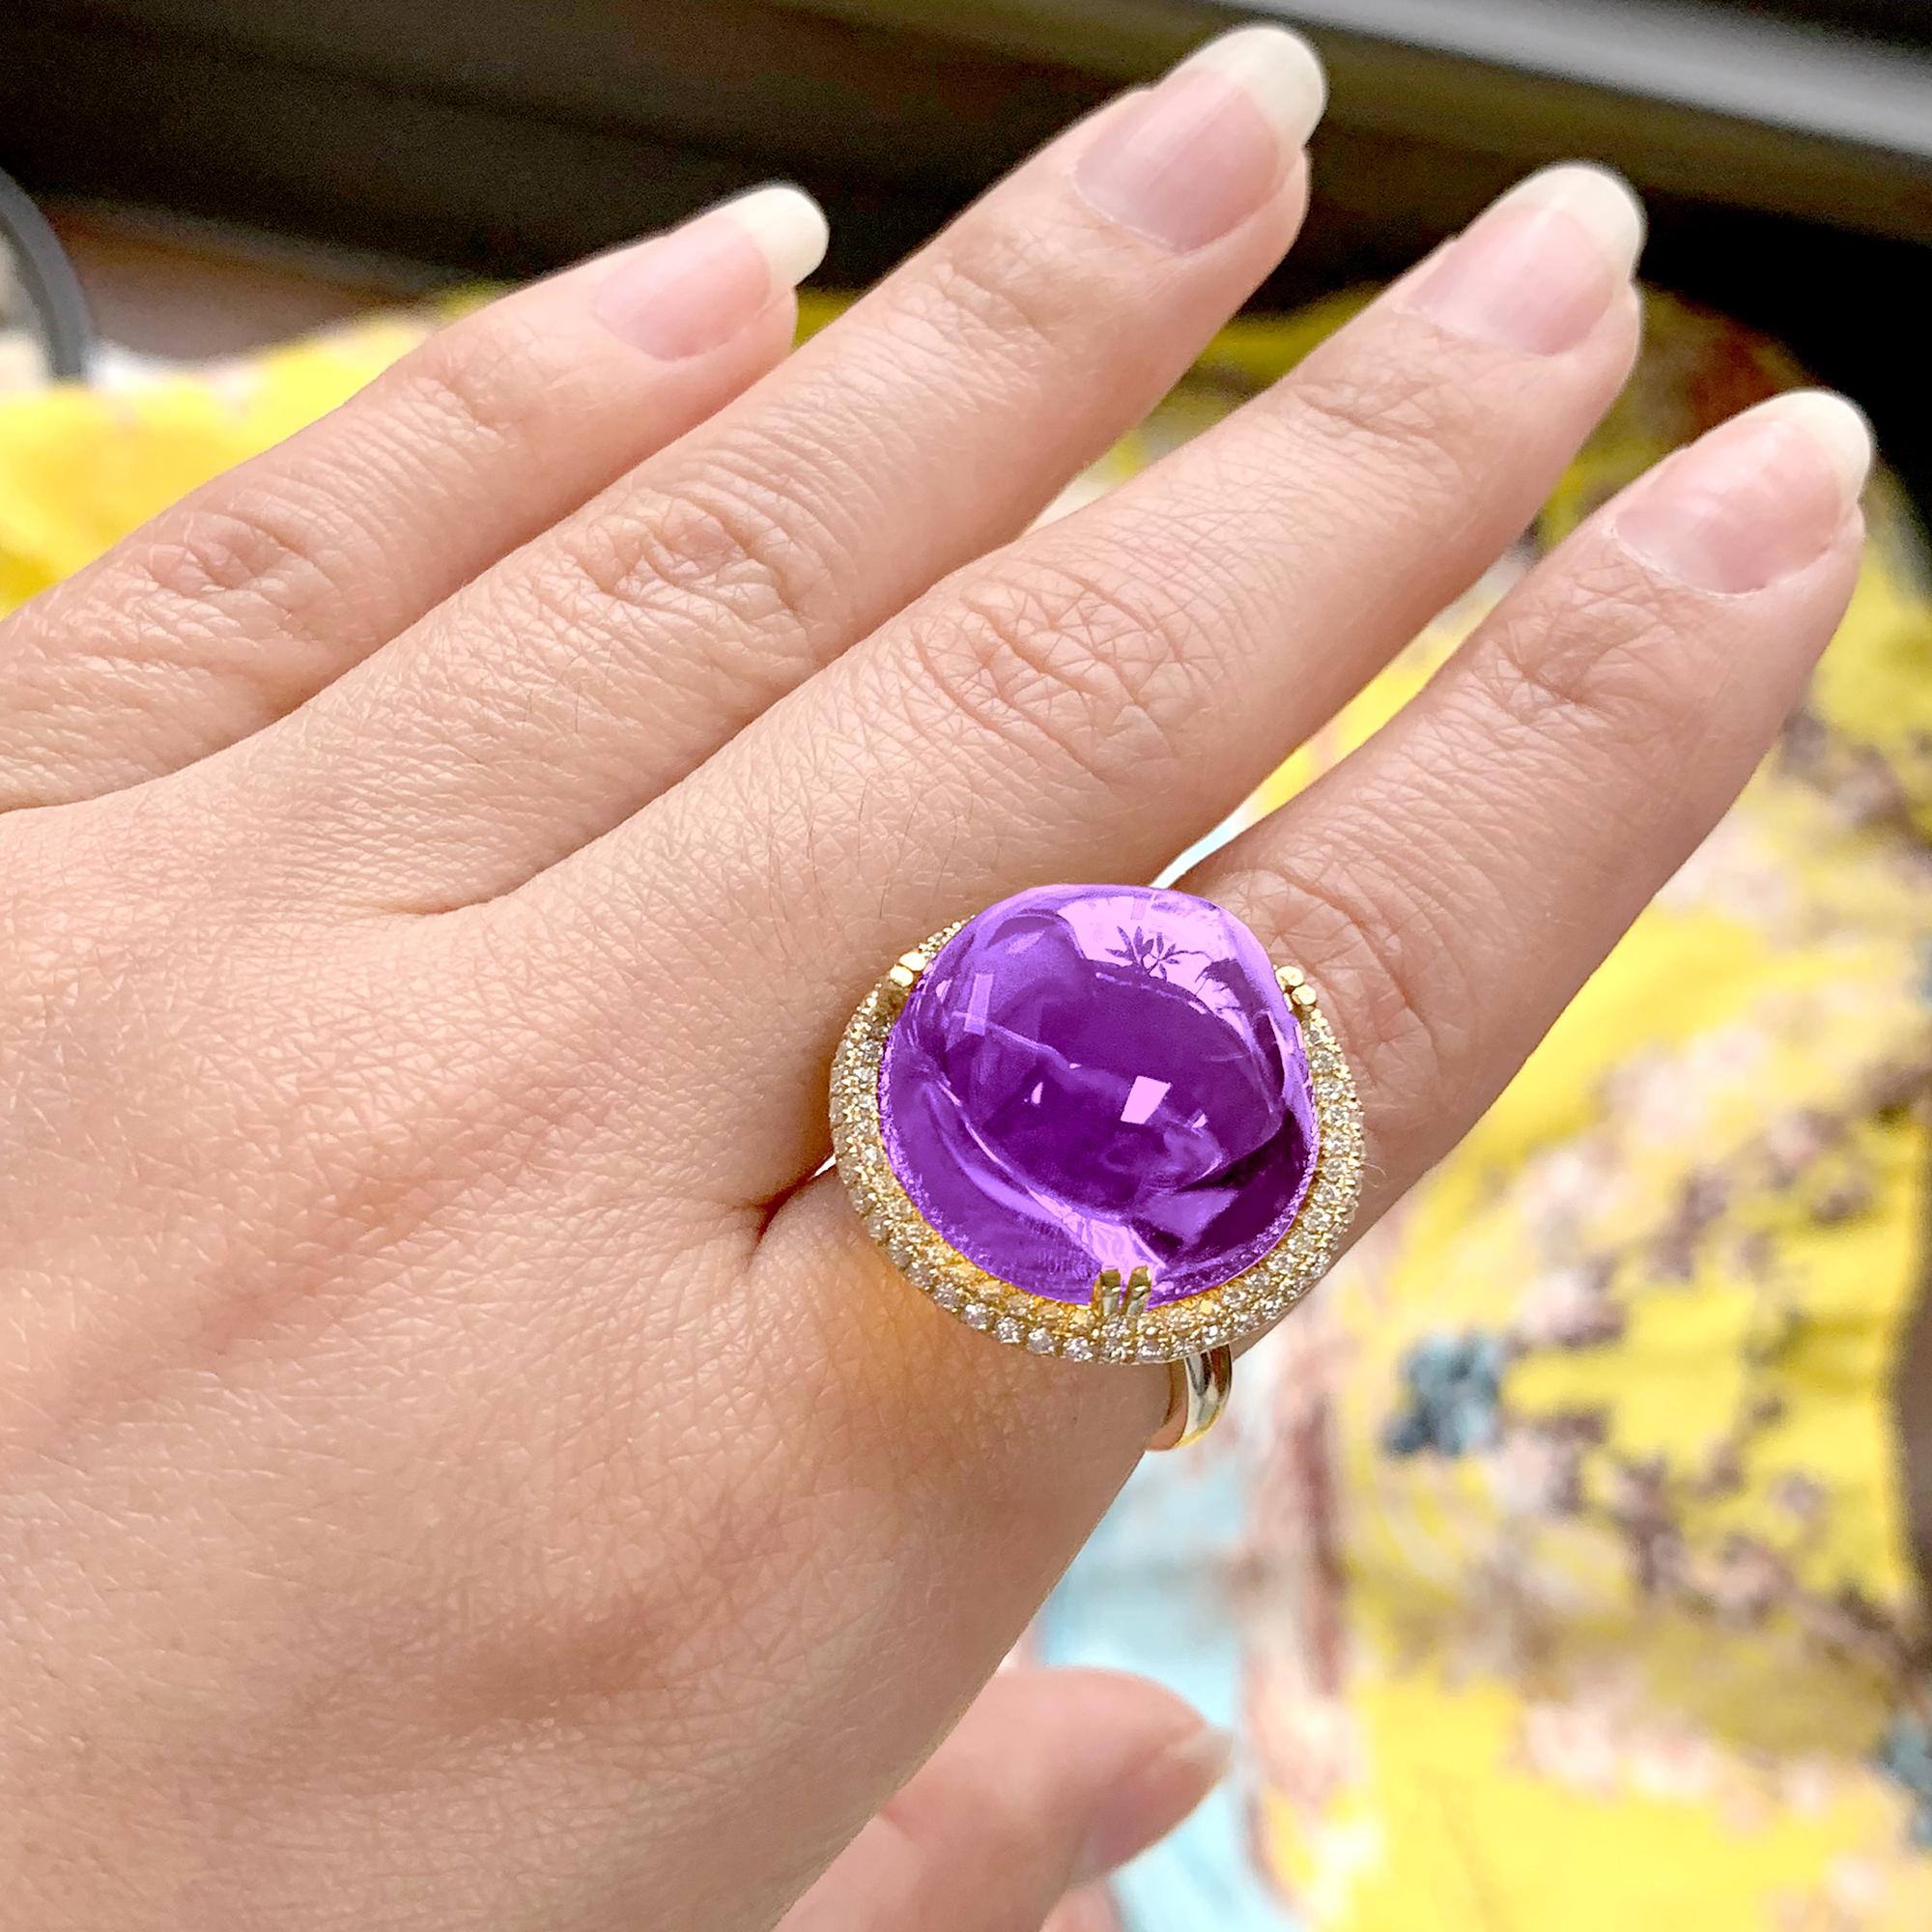 The Amethyst Uneven Round Cabochon Ring in 18K Yellow Gold with Diamonds is a stunning piece from the 'Rock 'N Roll' Collection. The ring features a vibrant amethyst stone that is cut in an uneven round cabochon shape, adding a unique and edgy touch